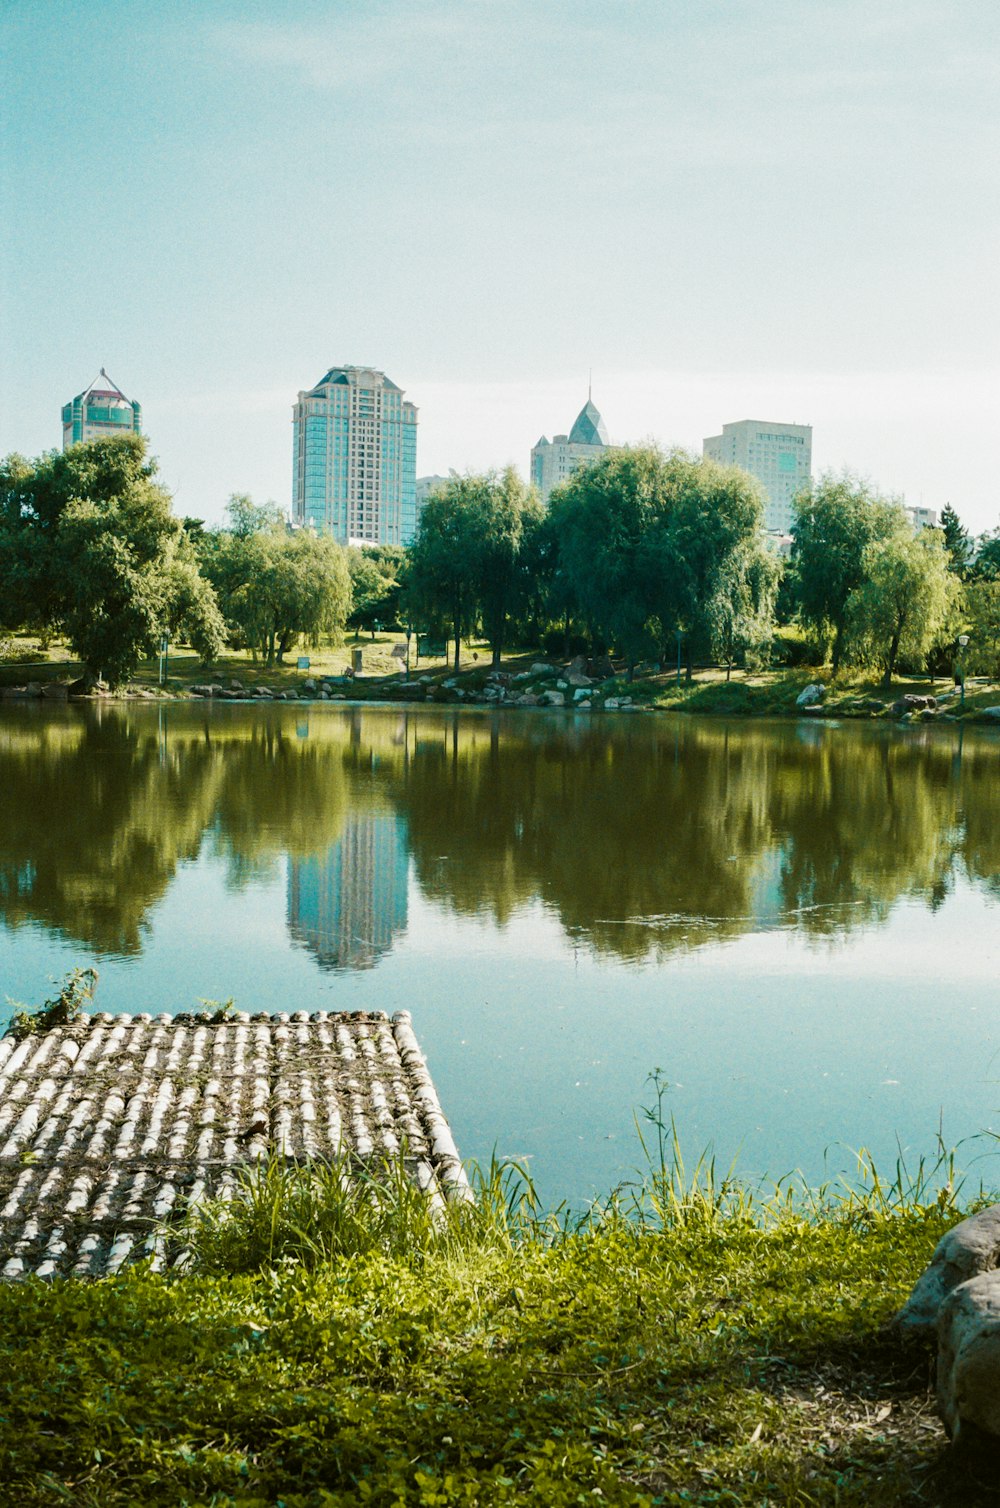 a view of a body of water in a city park